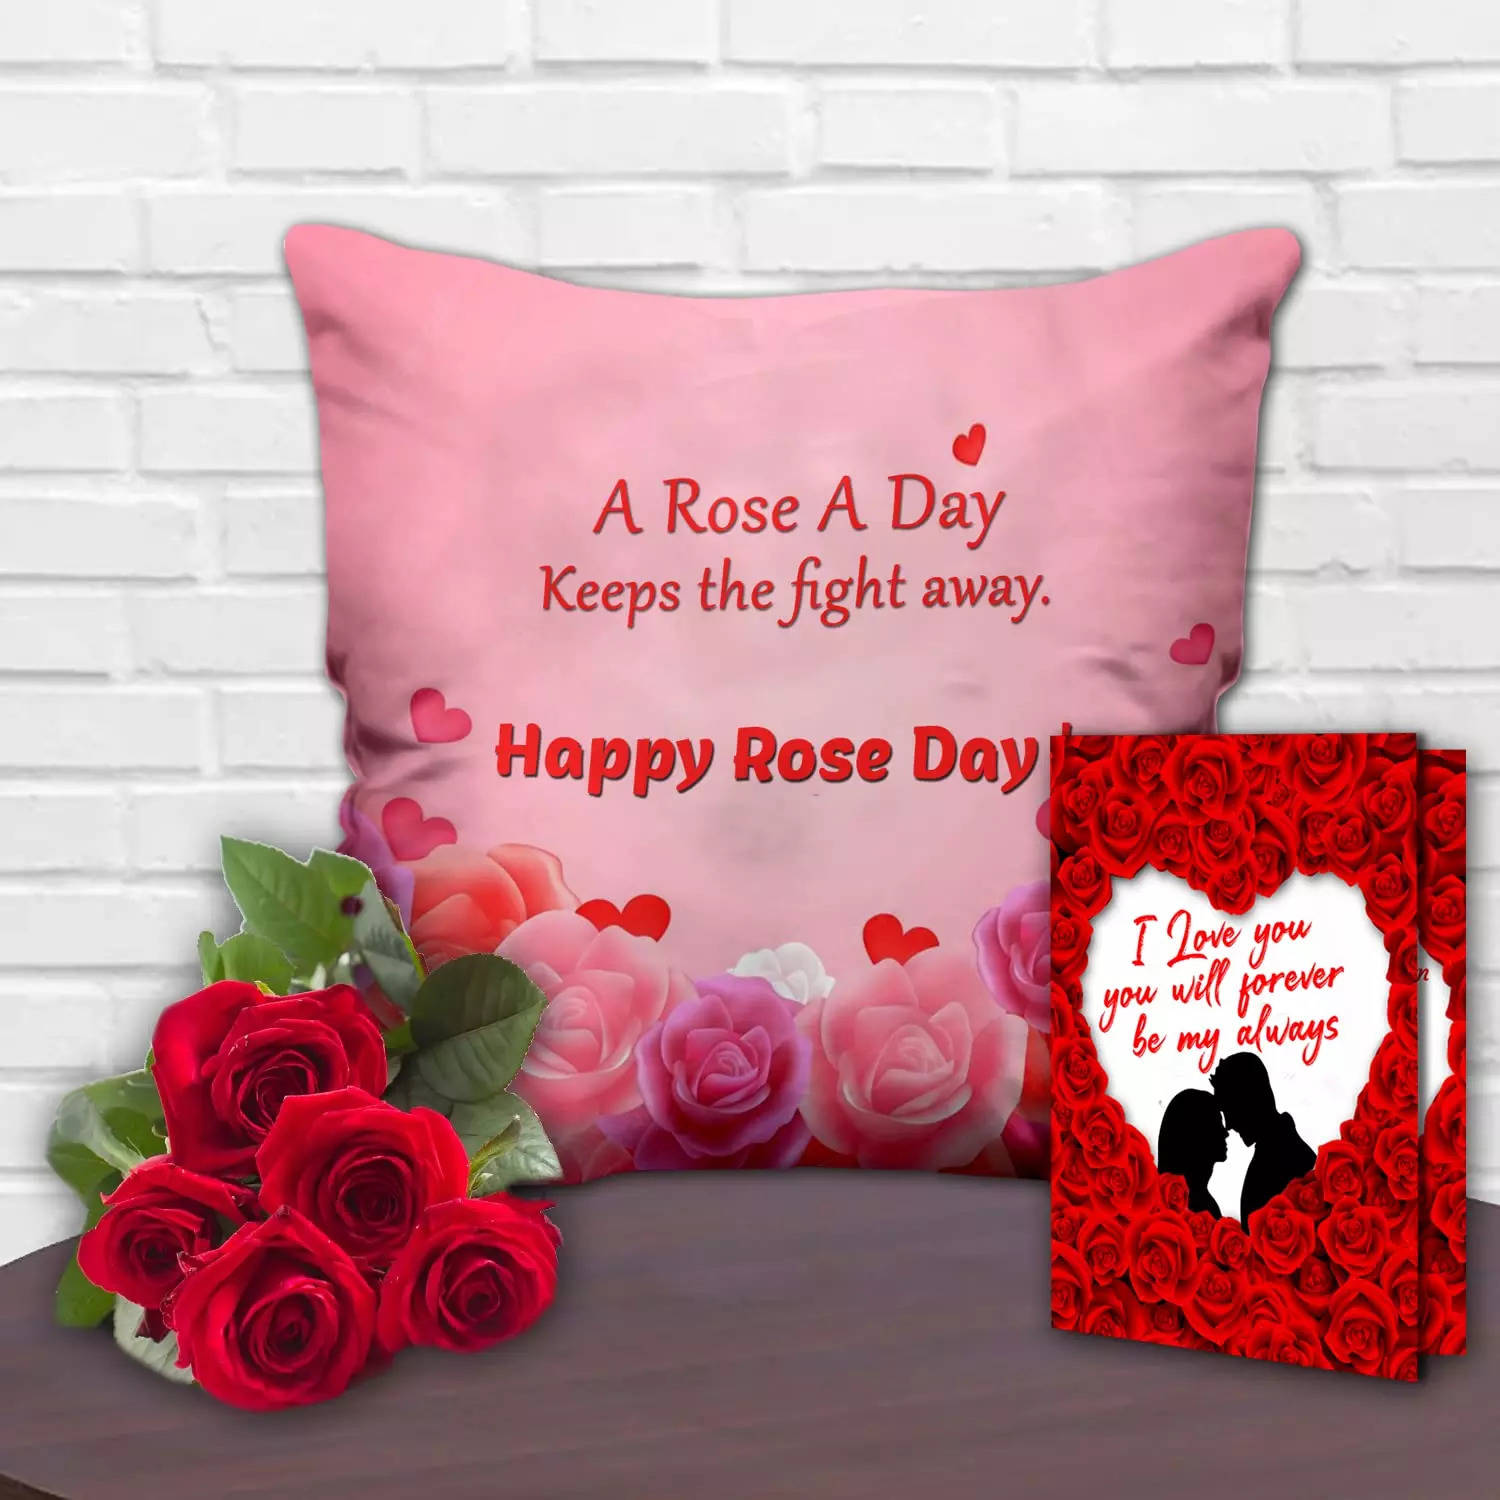 Valentine's Gift Ideas With Zazzle! - Your Everyday Family